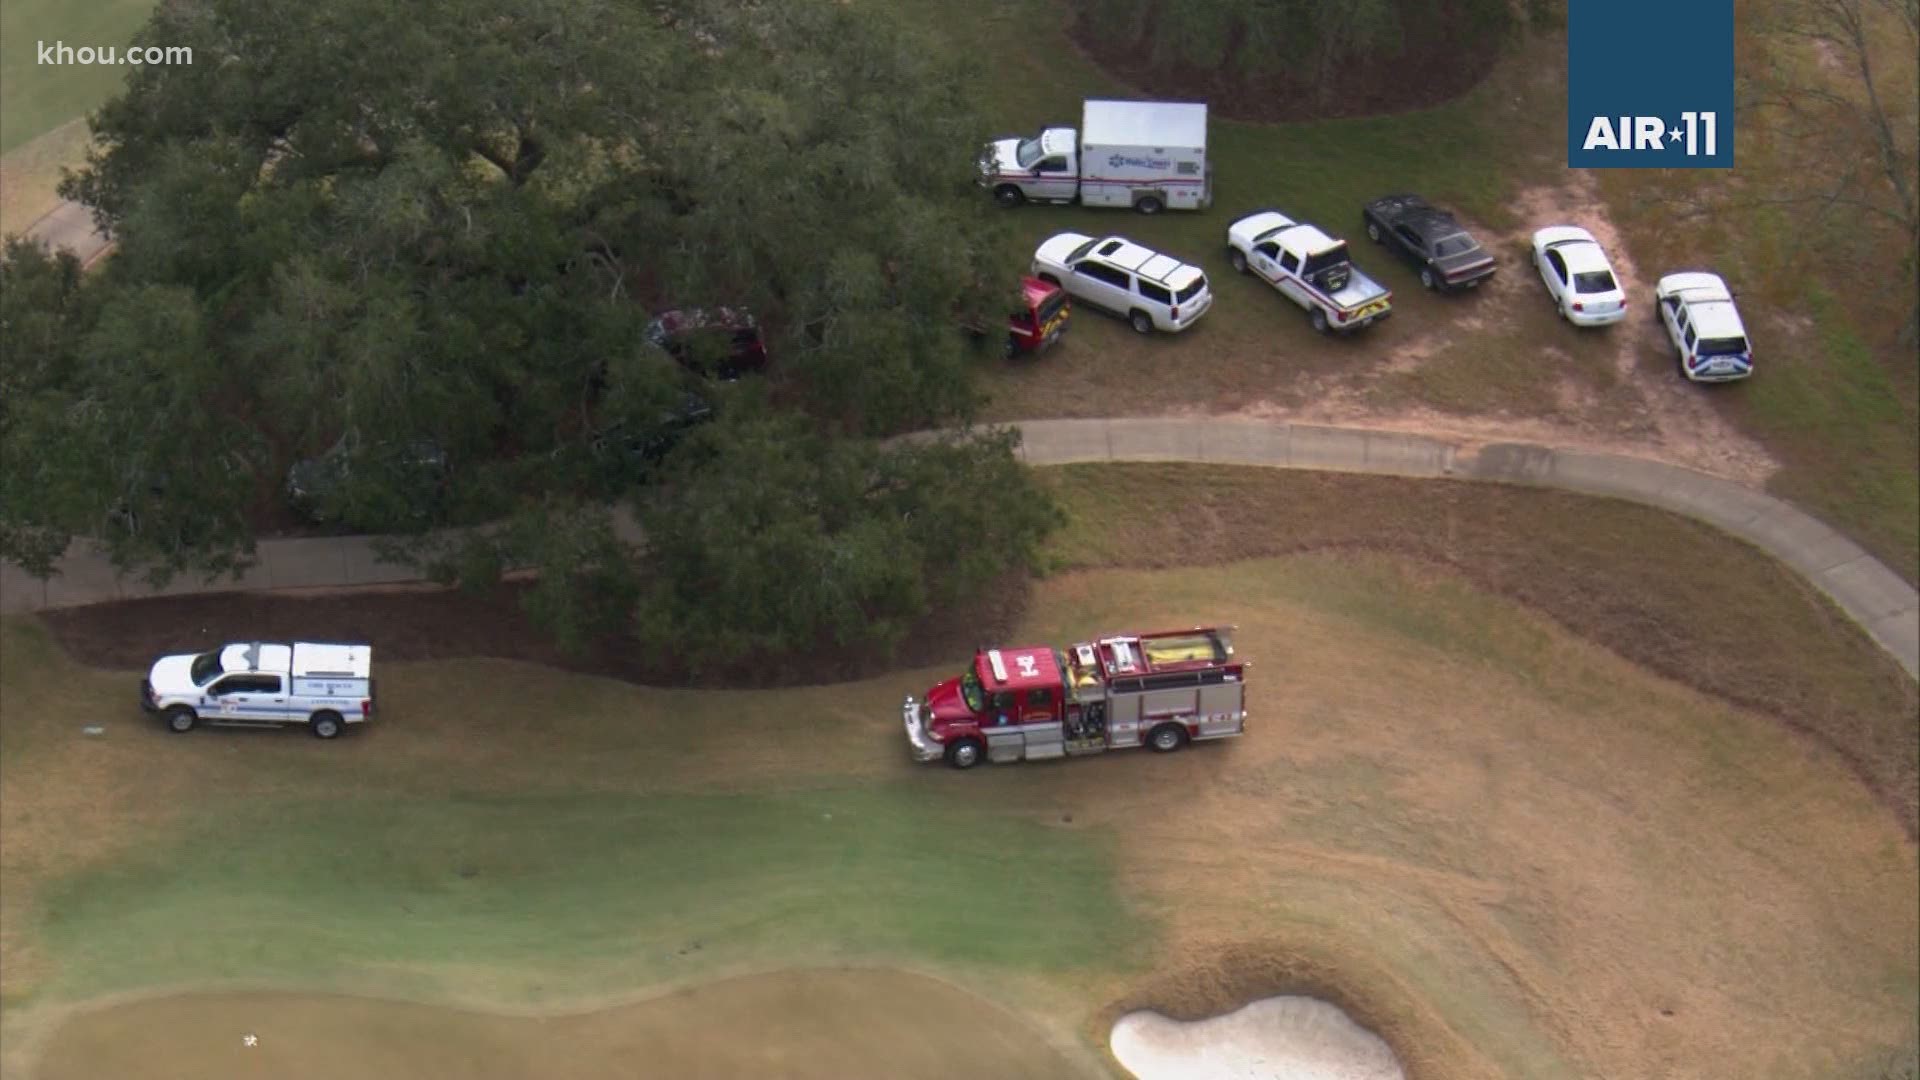 A groundskeeper died after an accident at a golf course northwest of Houston early Monday, the Waller County Sheriff’s Office confirmed to KHOU 11 News.